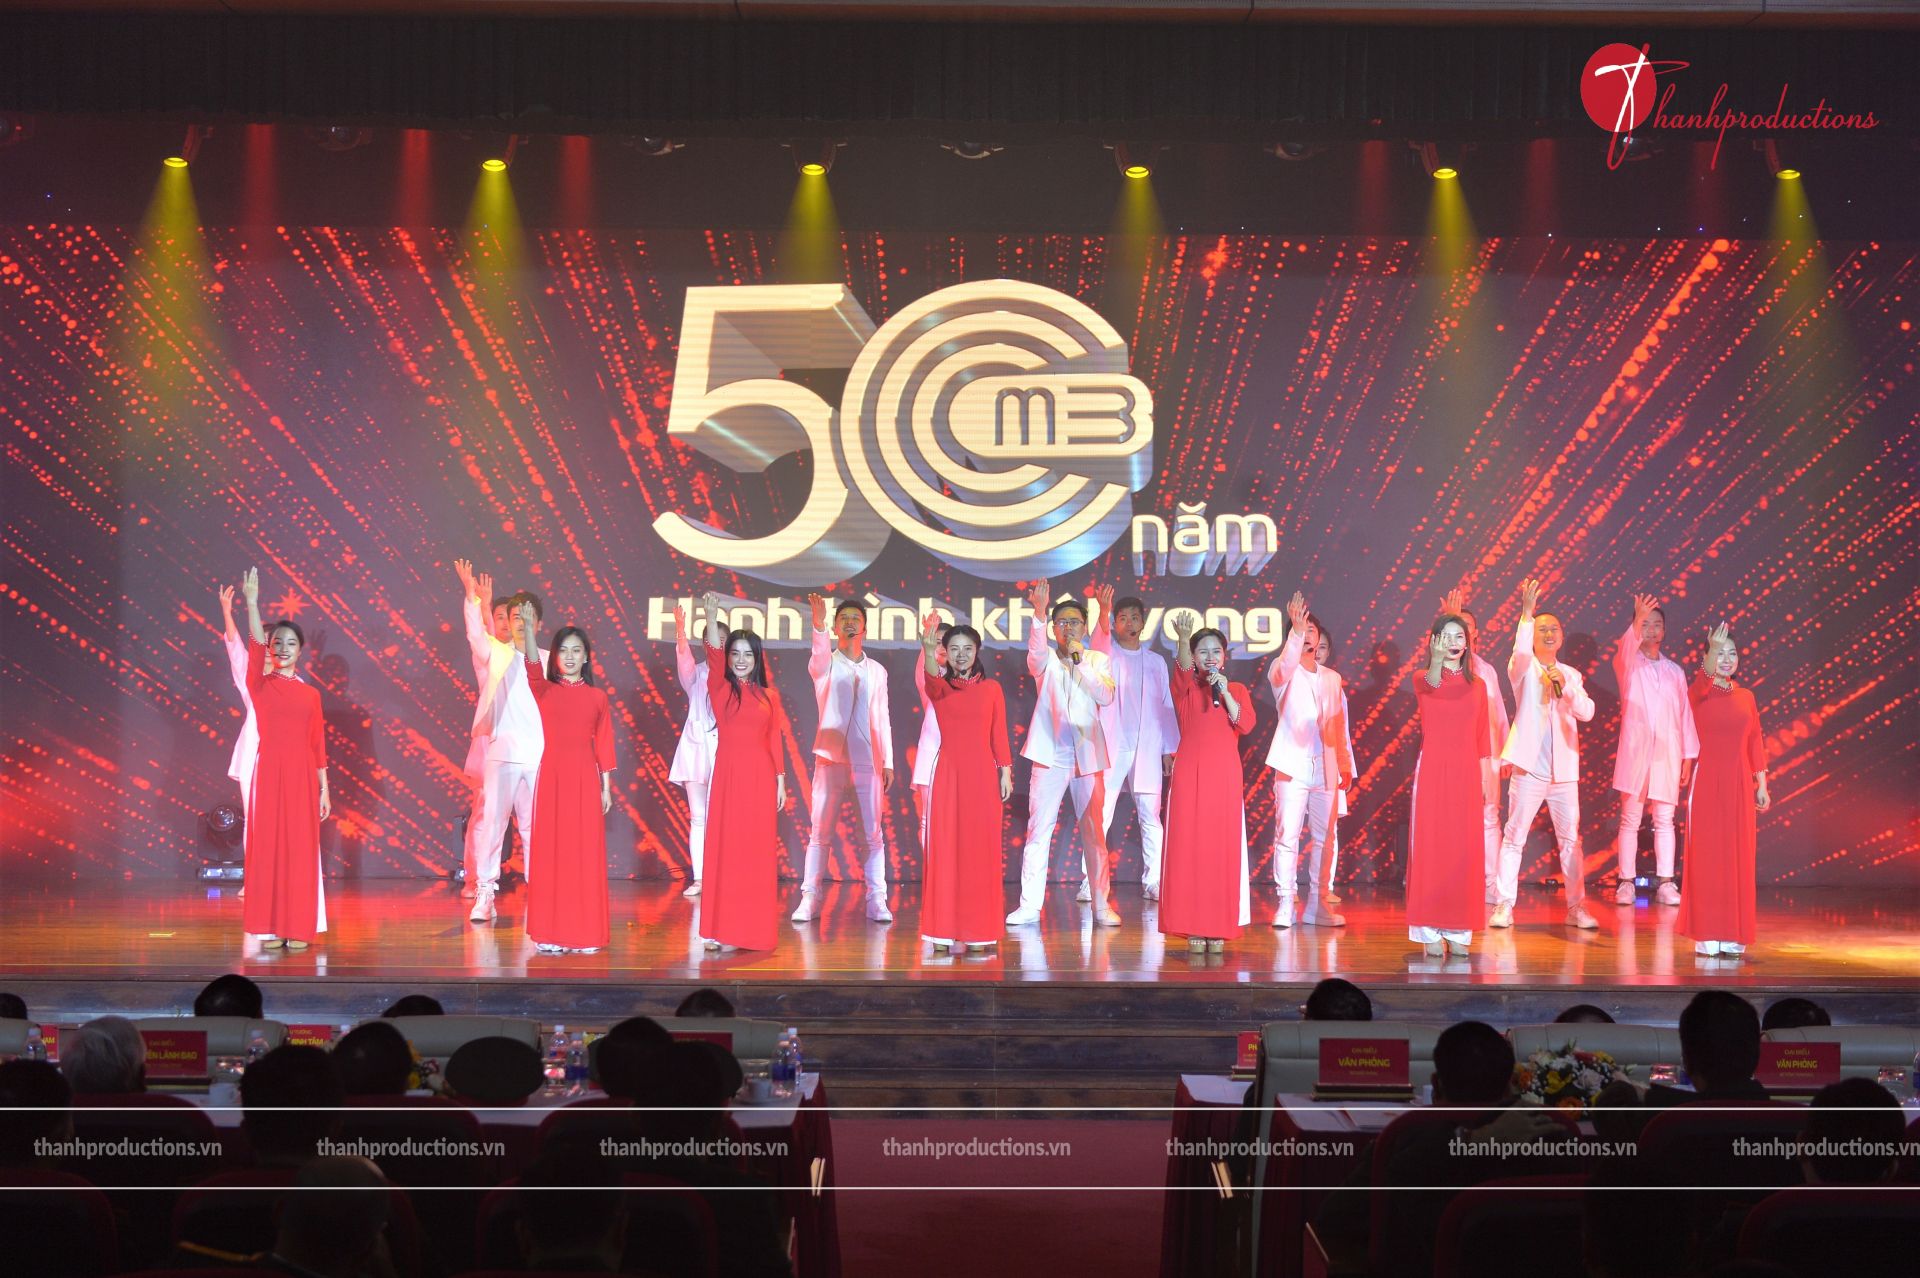 CELEBRATION OF 50 YEARS OF TRADITIONAL DAY M3 INFORMATION COMPANY AND RECEIVED THE SECOND TRADING OF THE COUNTRY PROTECTION CHART